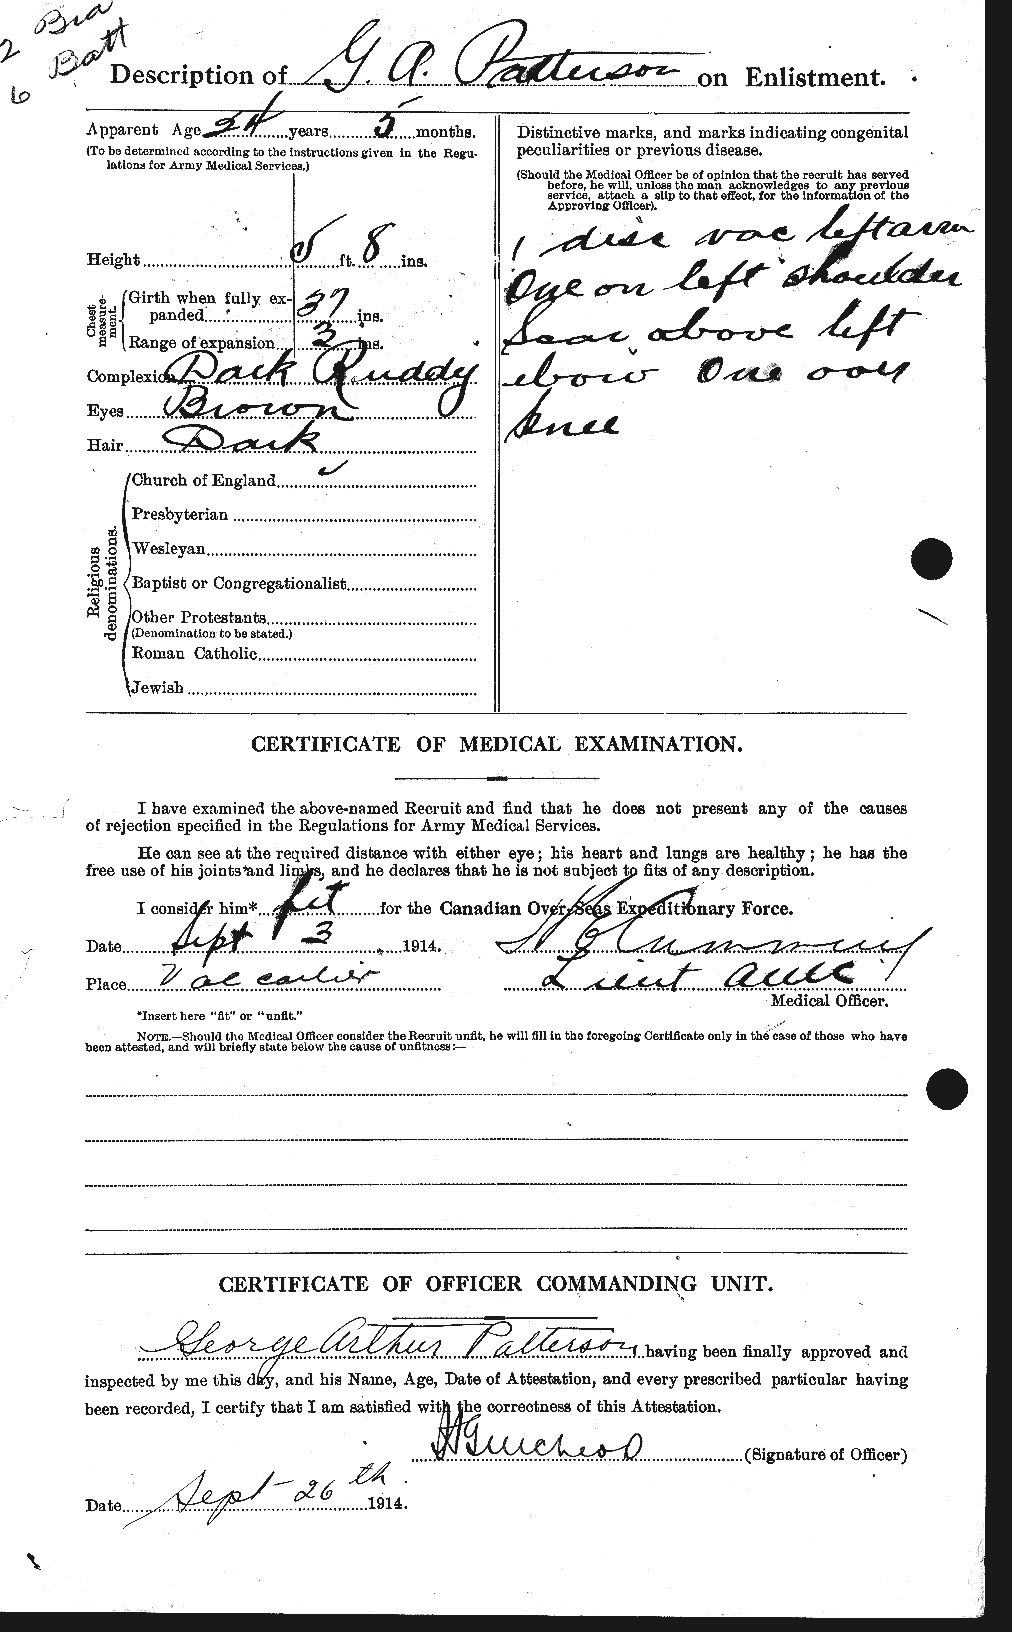 Personnel Records of the First World War - CEF 568409b